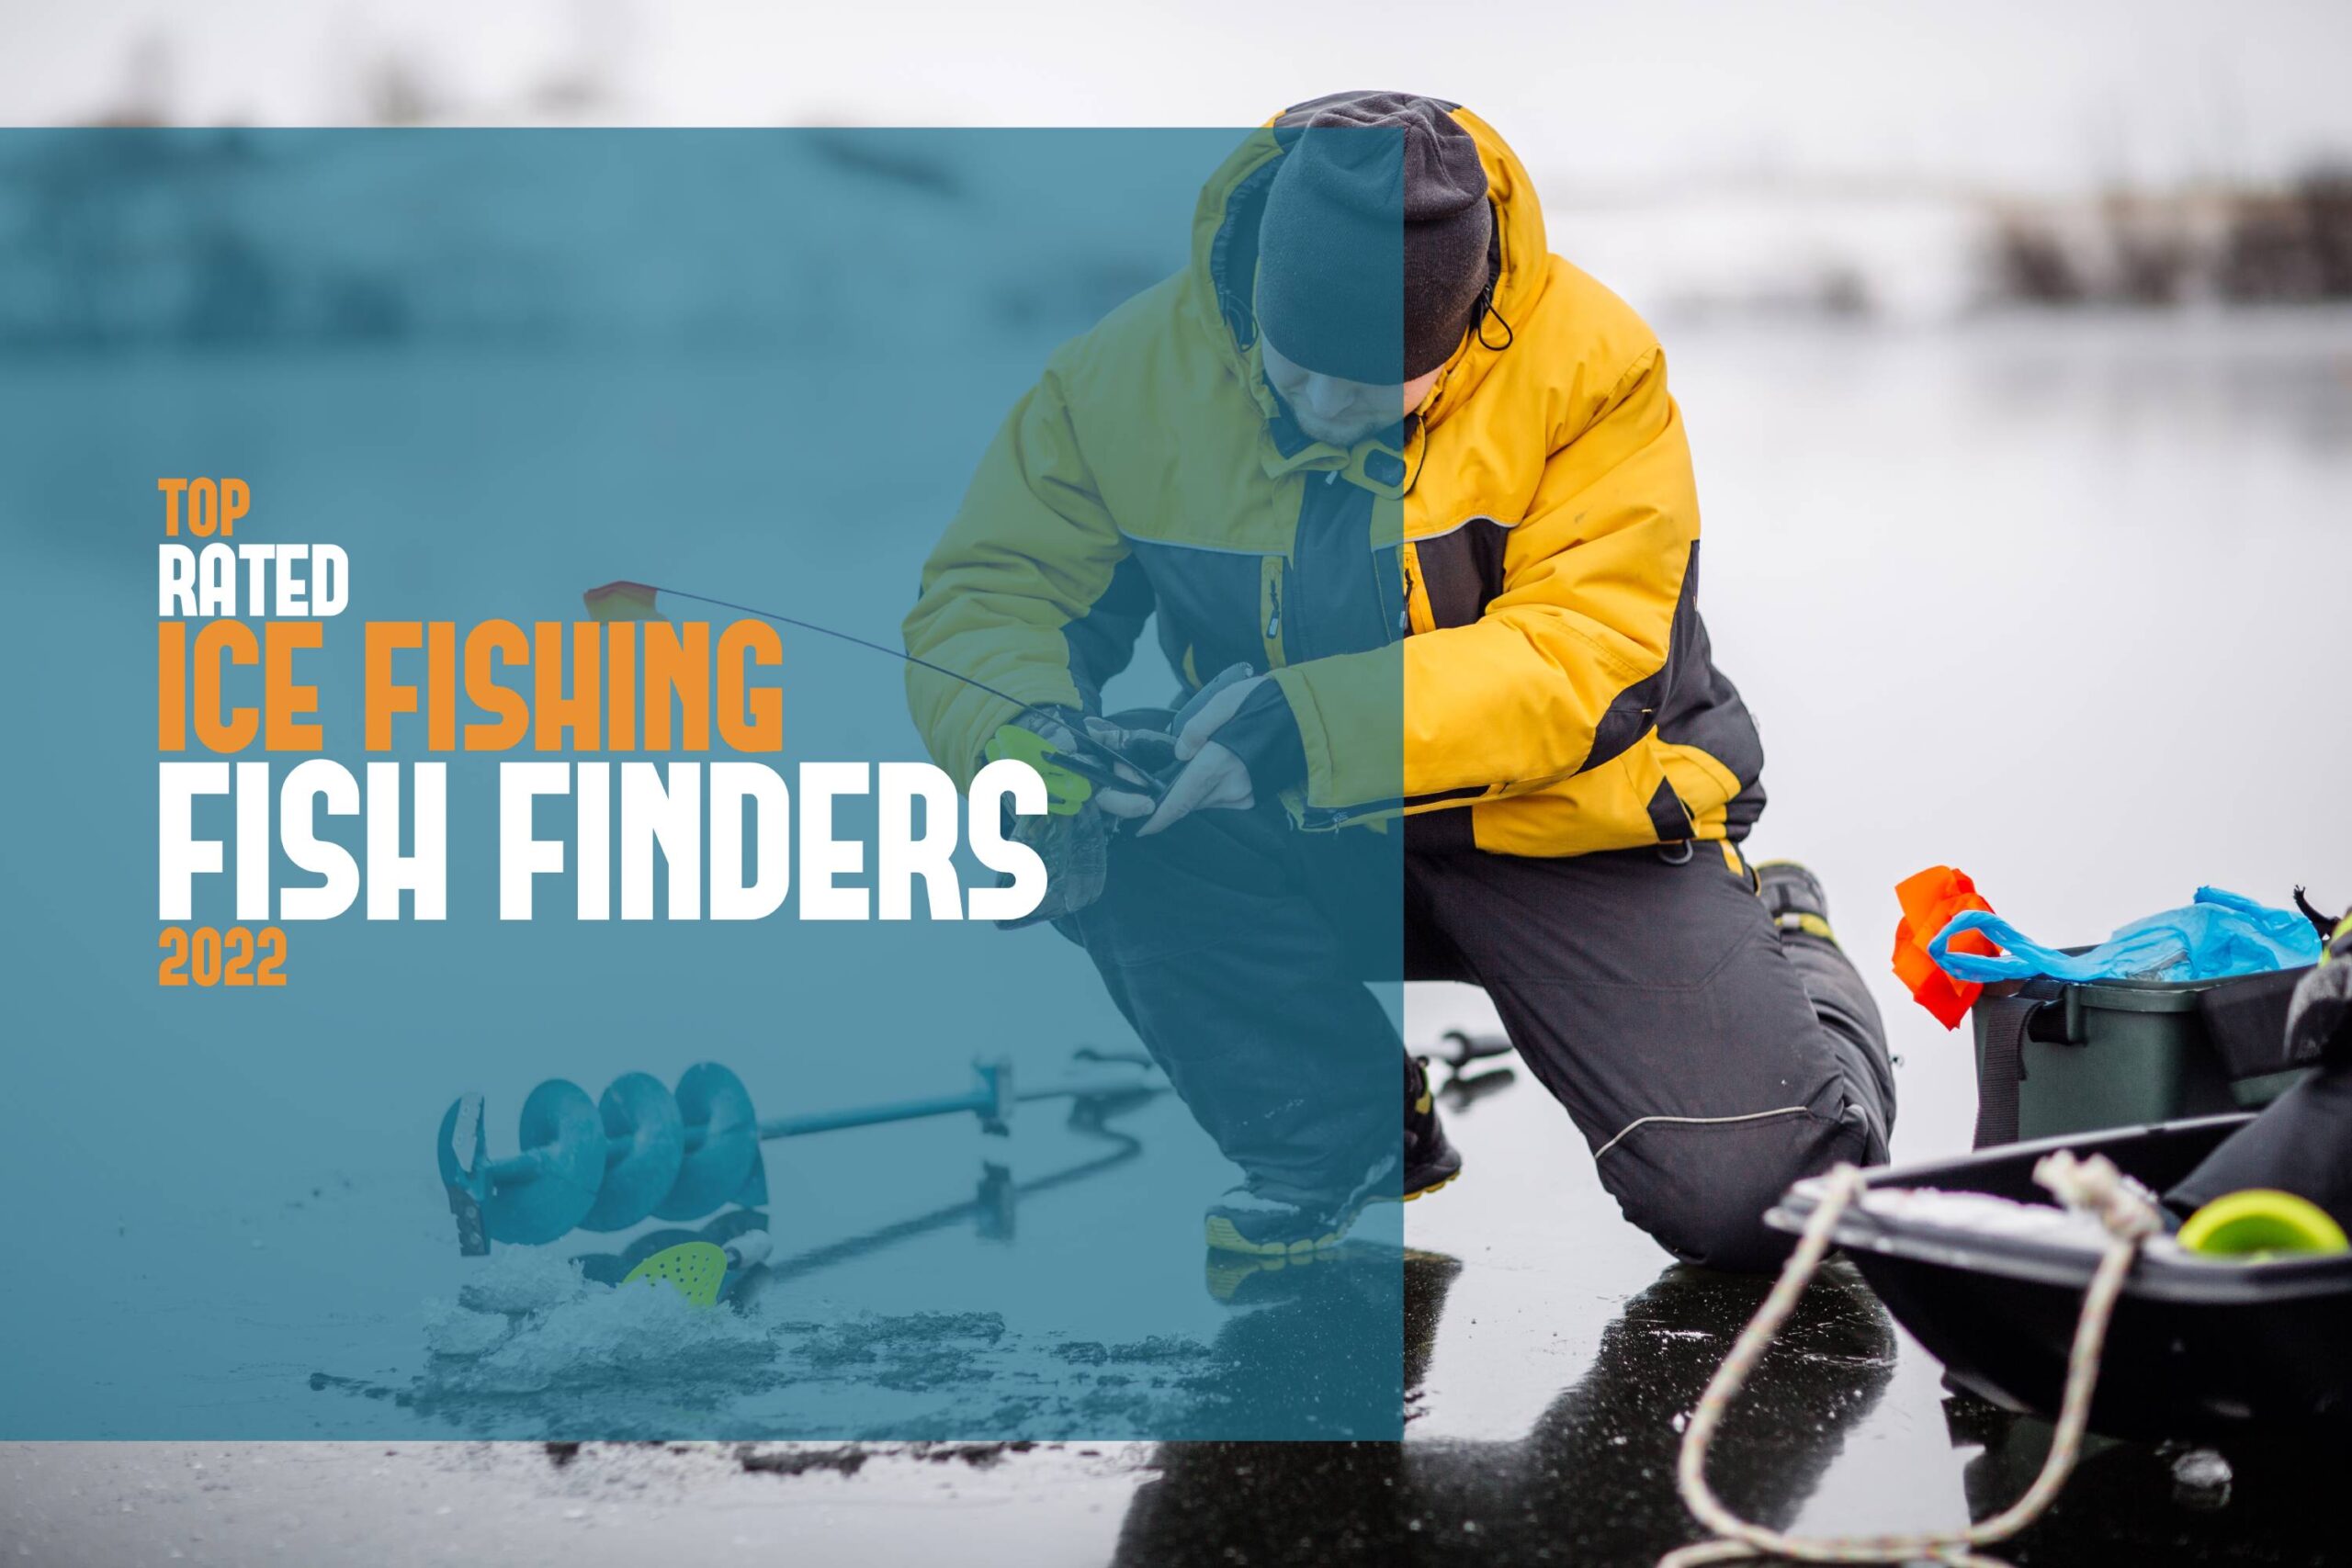 Top Rated Ice Fishing Fish Finders